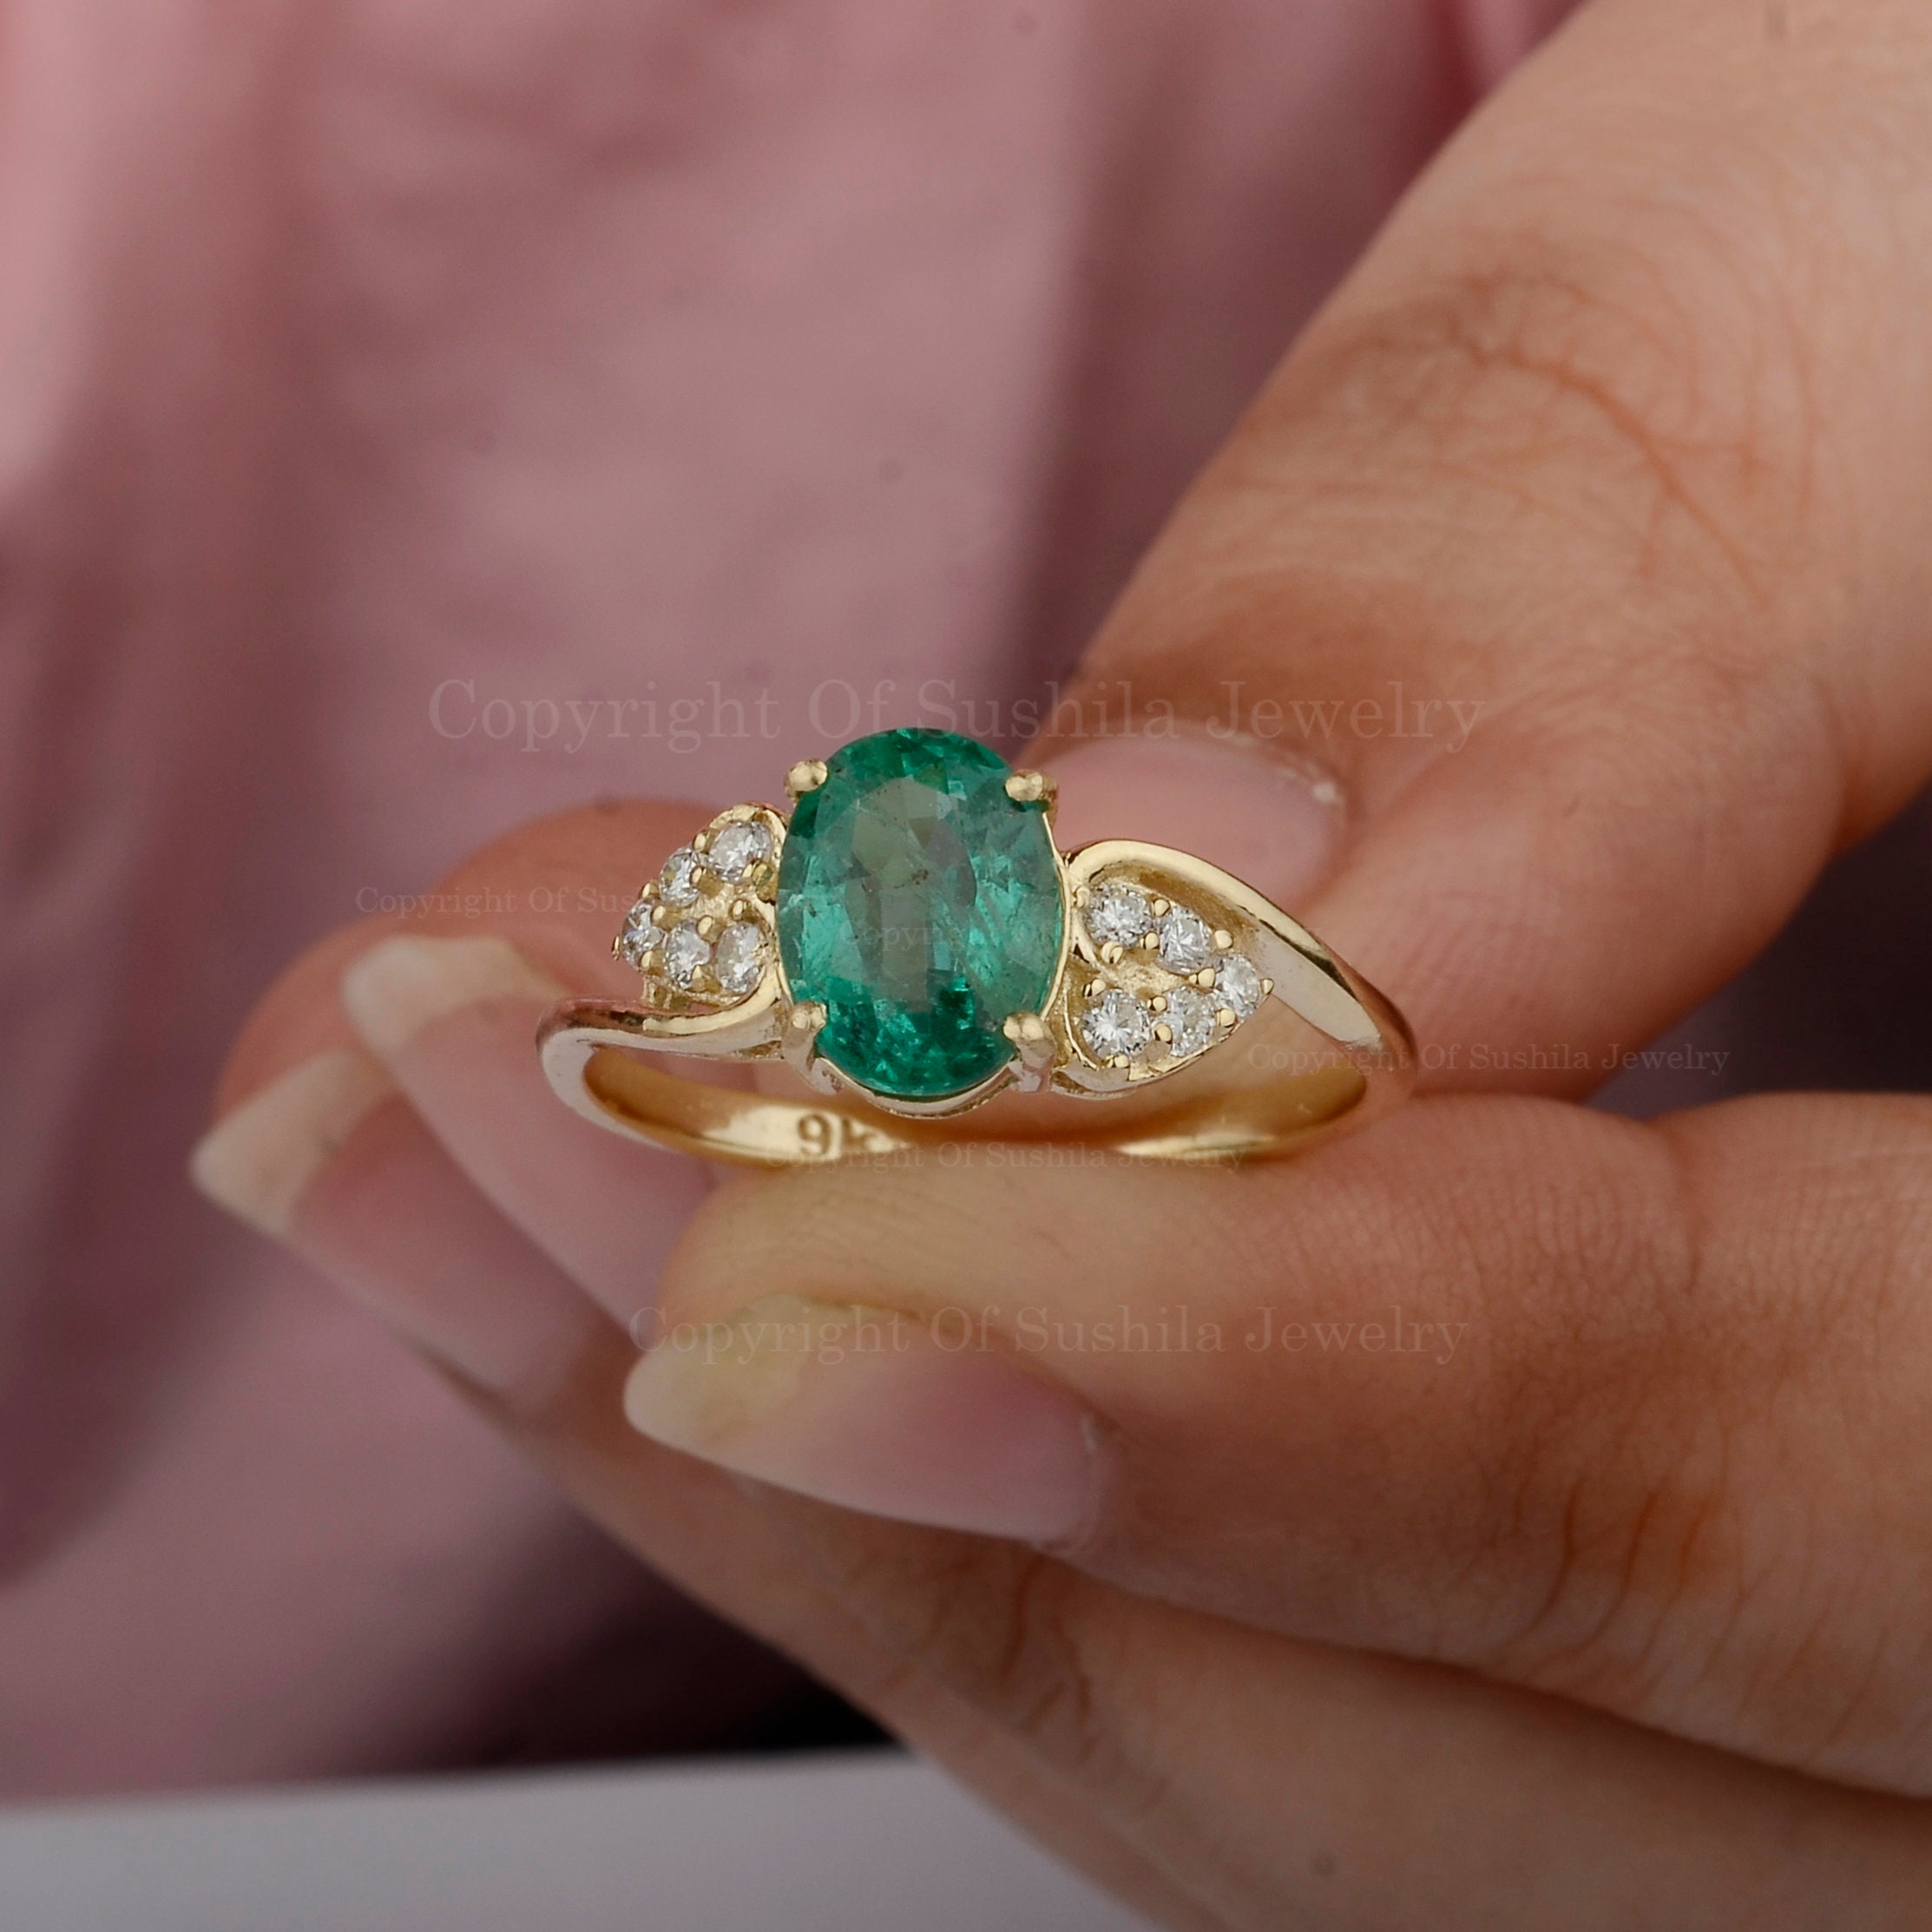 18K Solid Gold 3.51cts GIA Certified Oval Emerald Ring with a Hand-Engraved  Design| DIVADORA